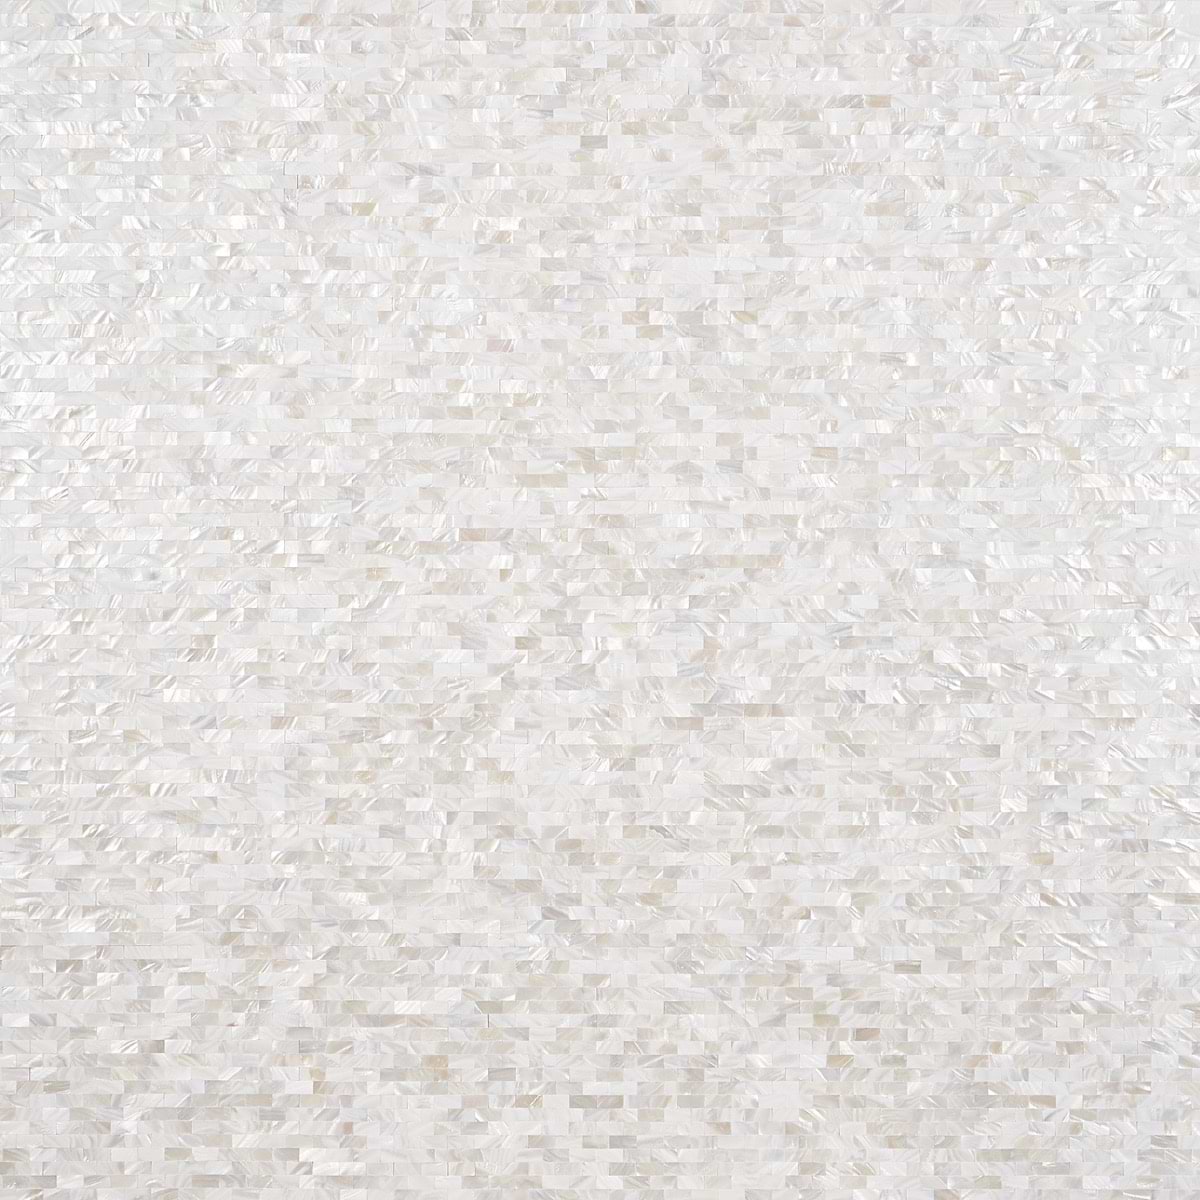 Mother of Pearl Brick Seamles Solid Core Peel & Stick Mosaic Tile ...